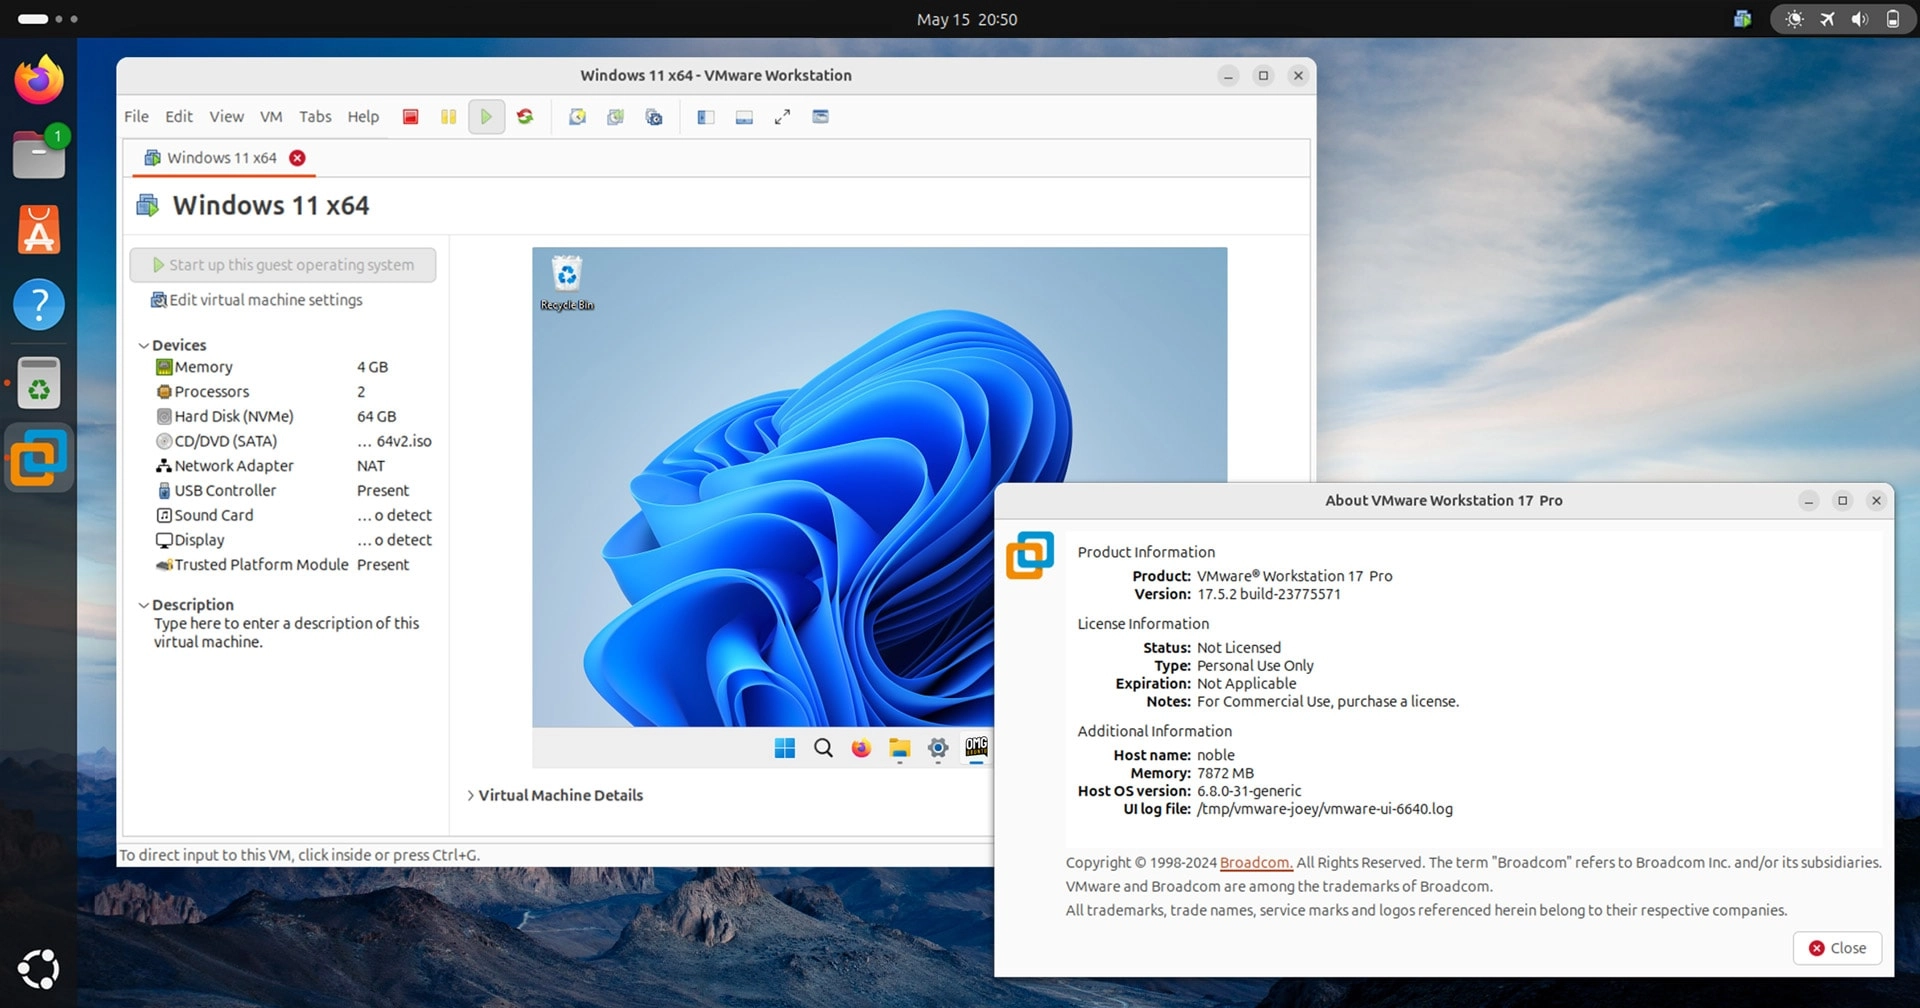 VMware Workstation Pro Now Available for Free on Linux and Windows